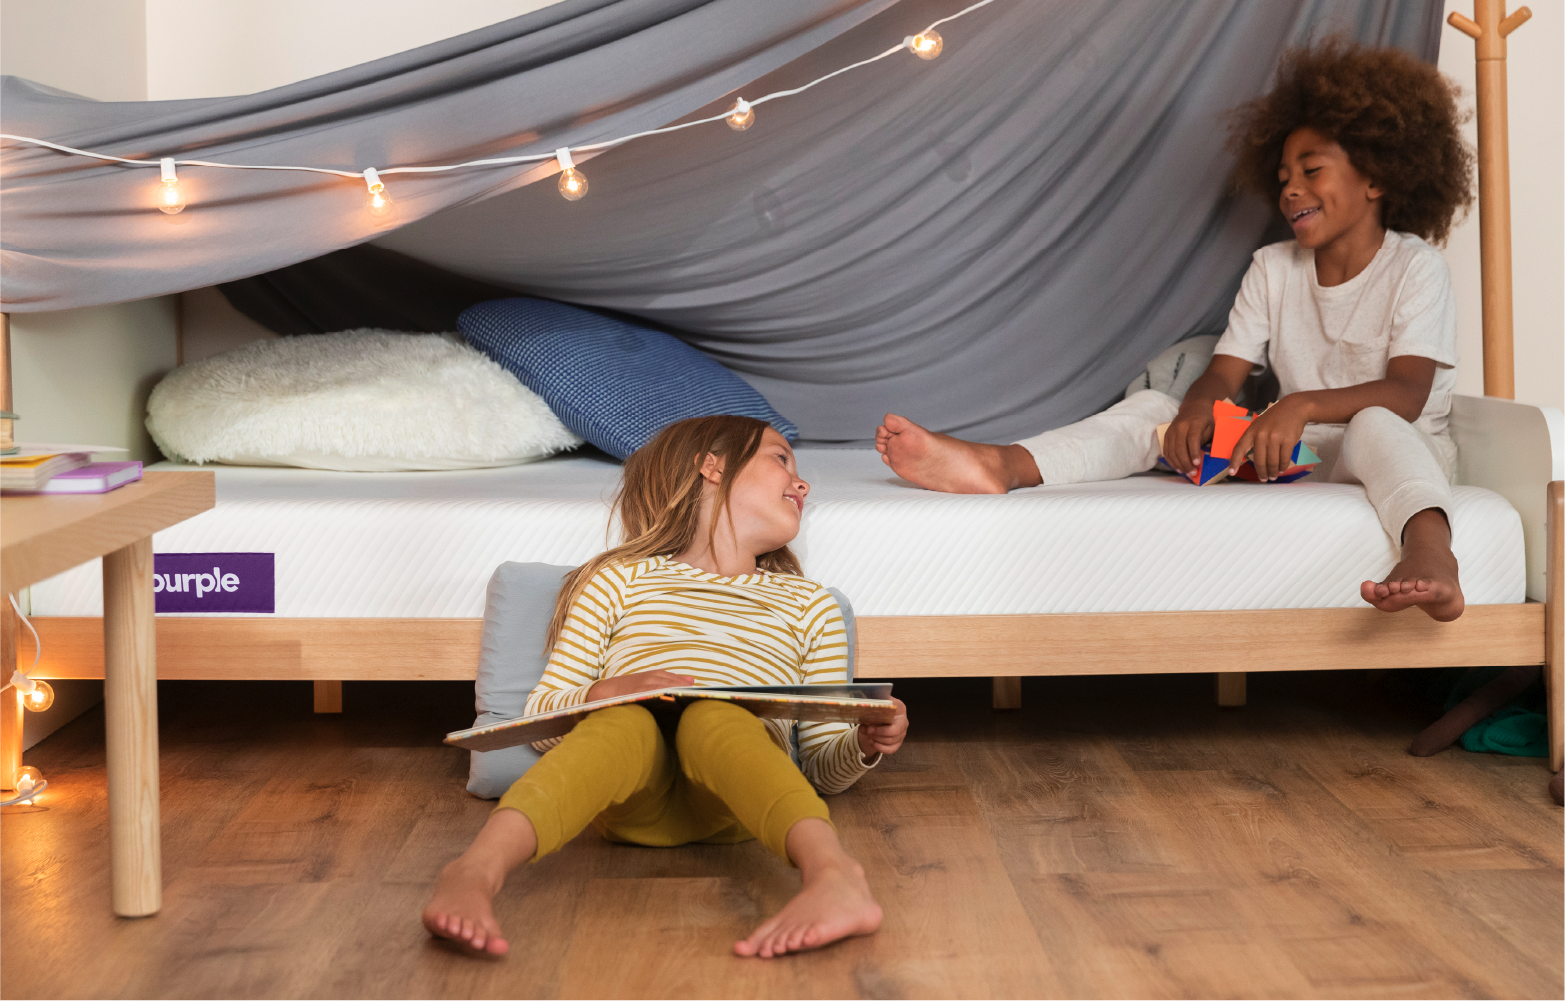 Two children playing in a bedroom with a Purple Kid’s Mattress, using a Purple kids’ sheet to make a blanket fort.